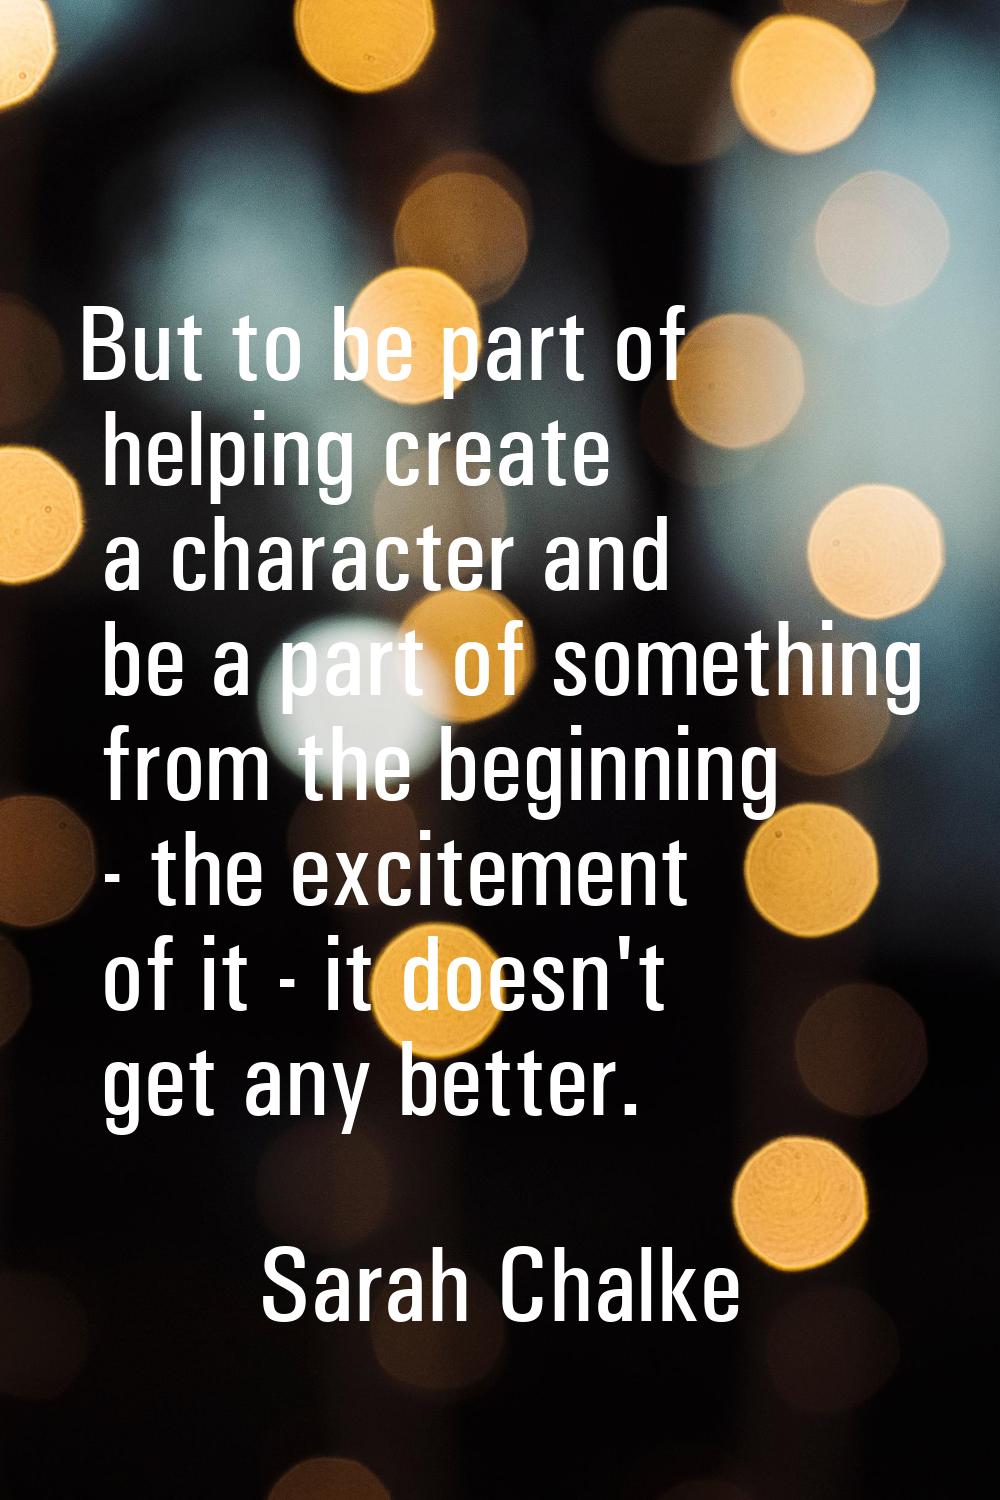 But to be part of helping create a character and be a part of something from the beginning - the ex